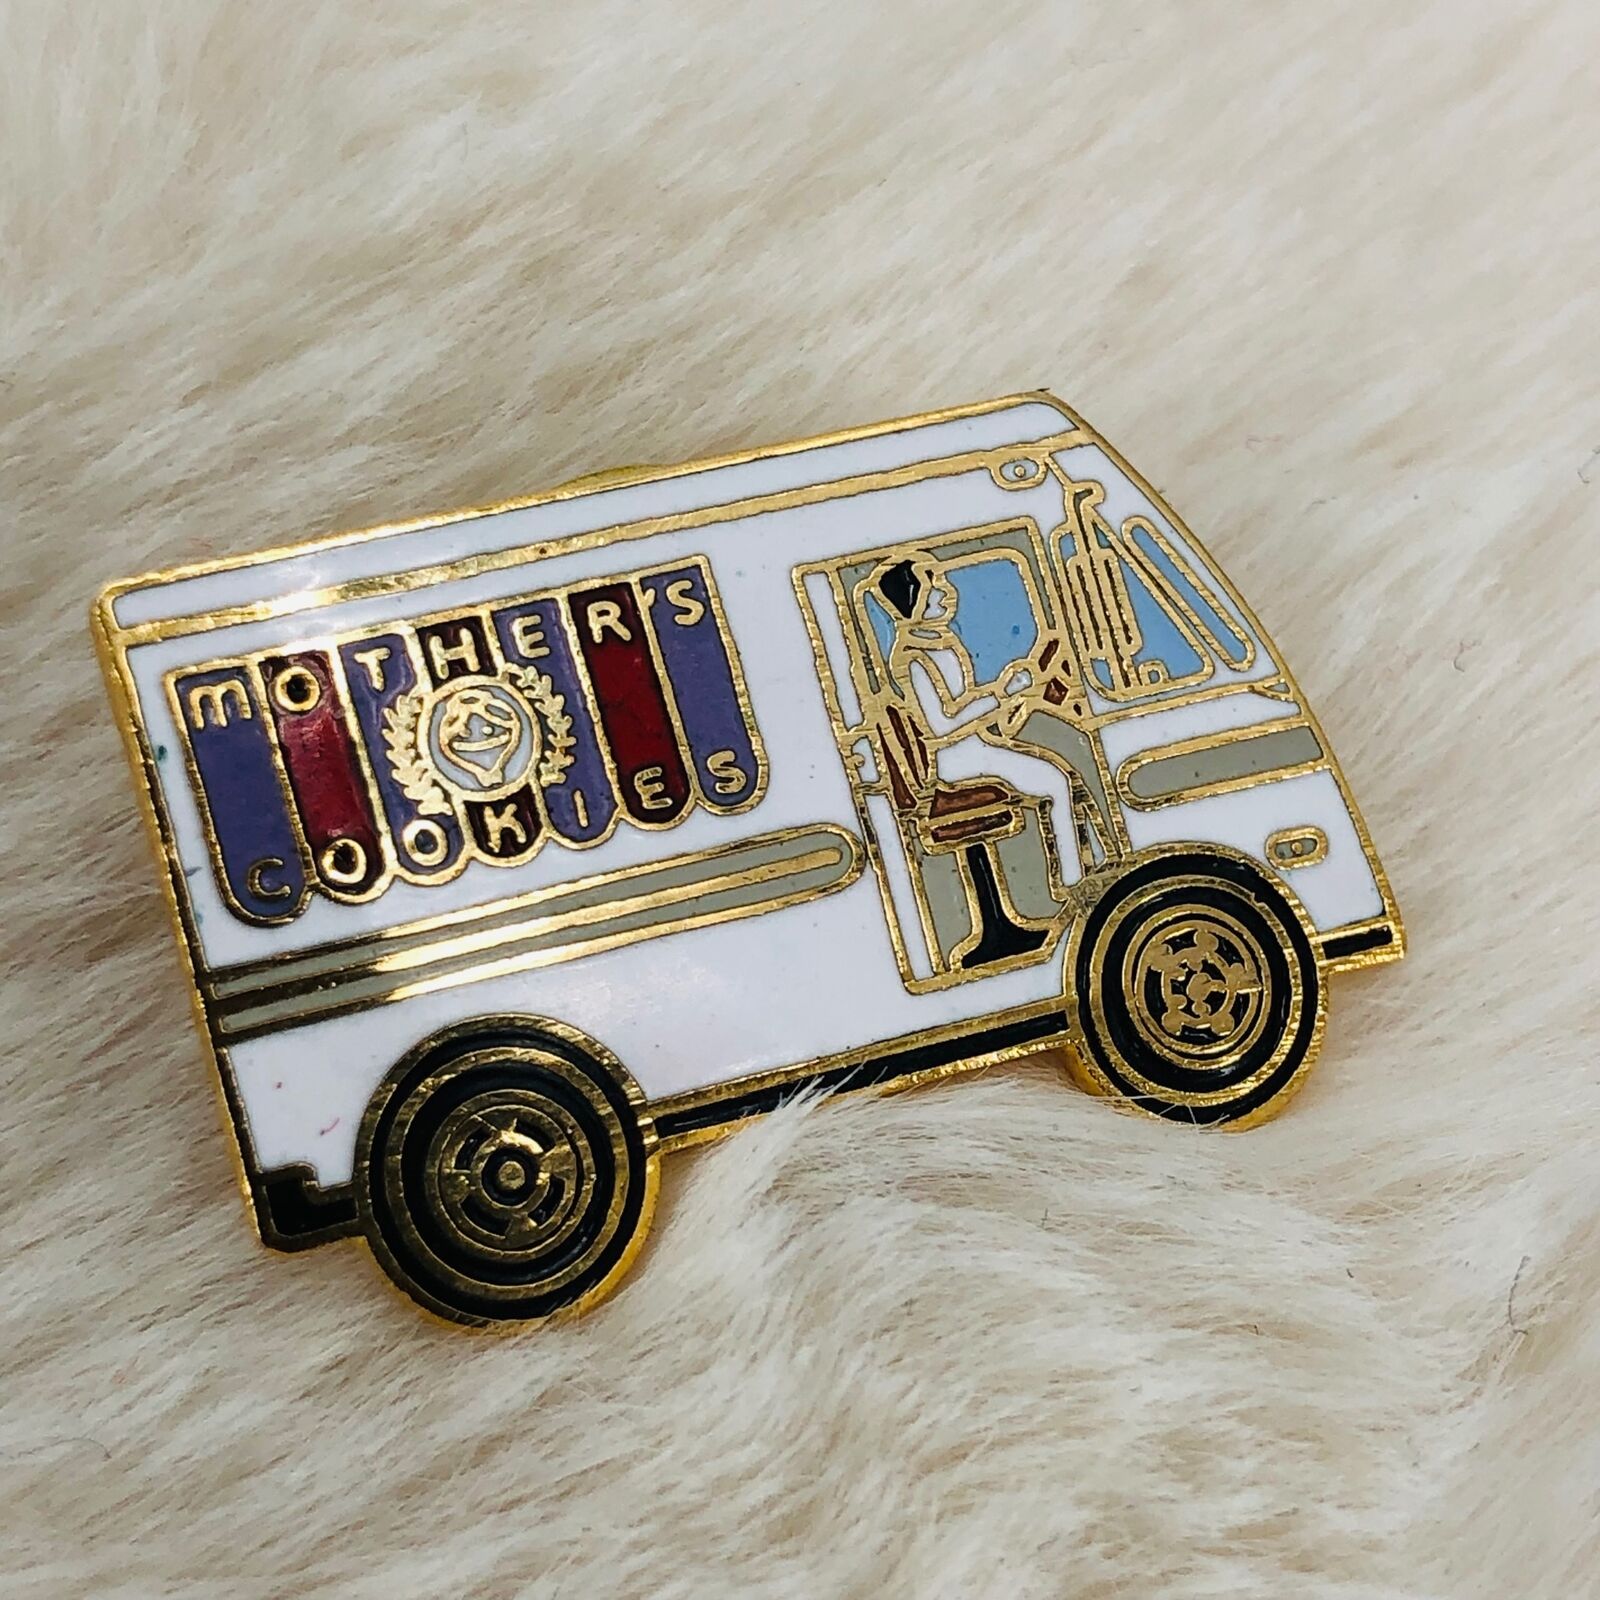 Vtg Mothers Cookies Delivery Truck Advertising Enamel Lapel Pin